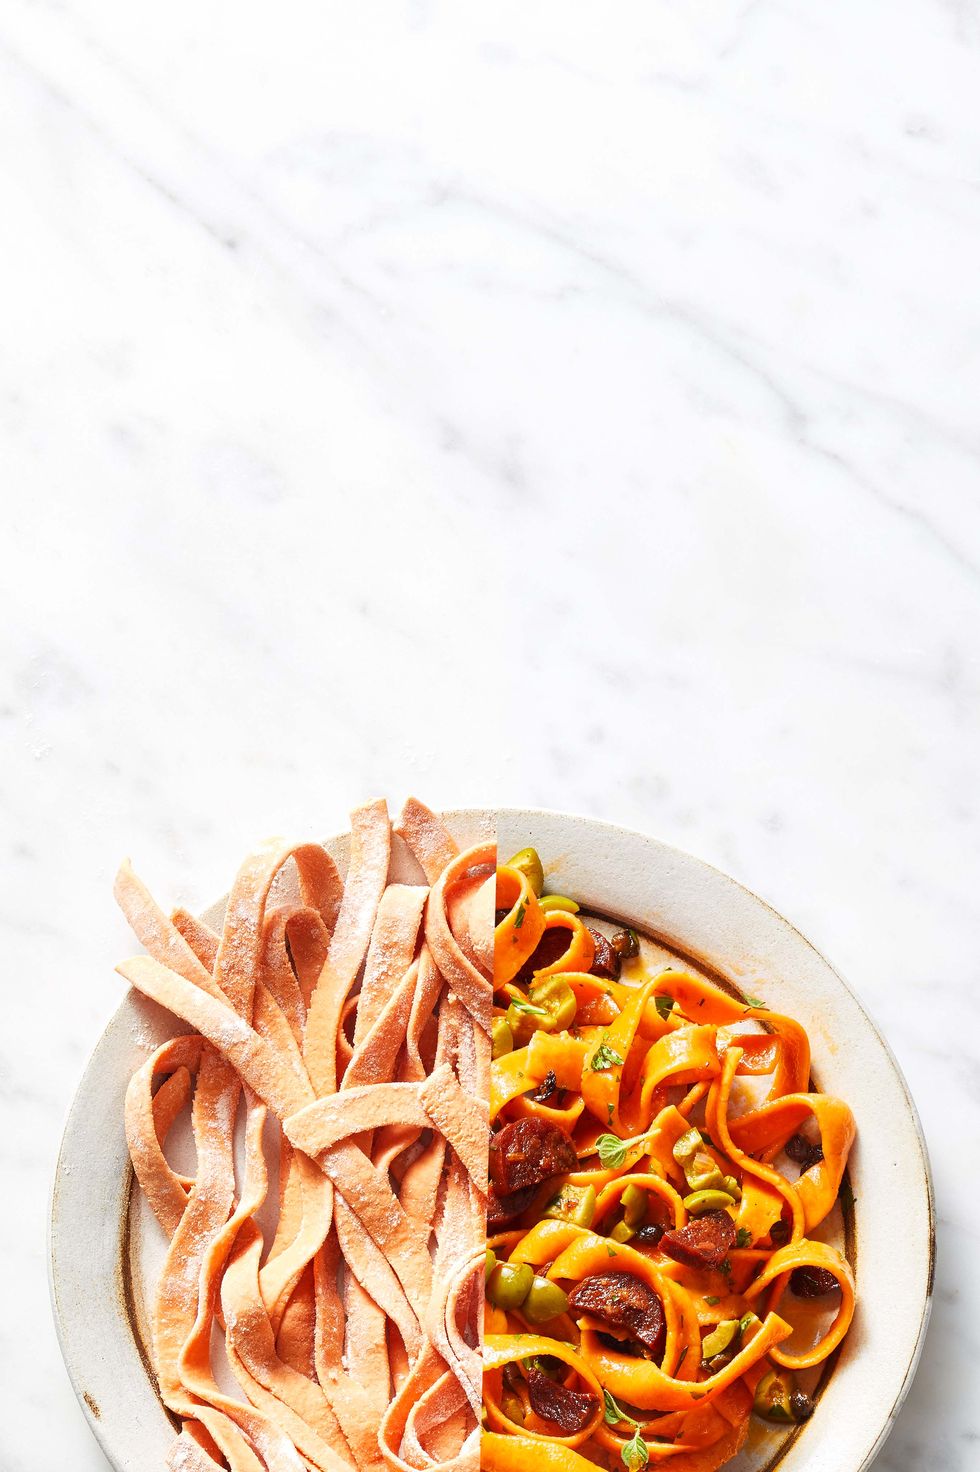 tomato tagliatelle with chorizo and olives on a plate